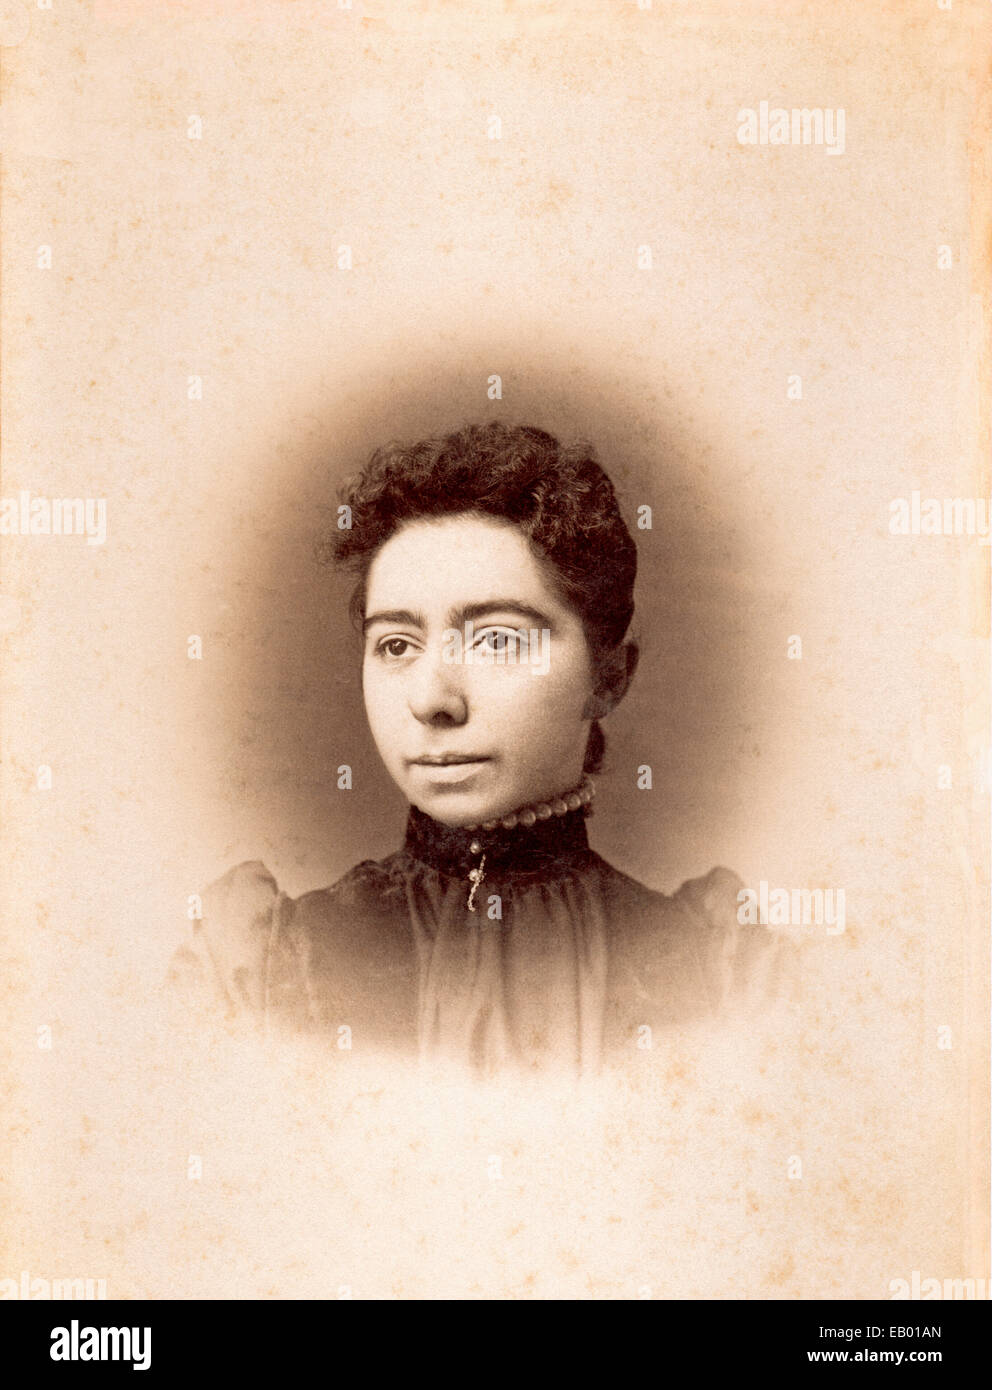 Vintage image of an ethnic female, 1889, wearing high-necked dress. Stock Photo